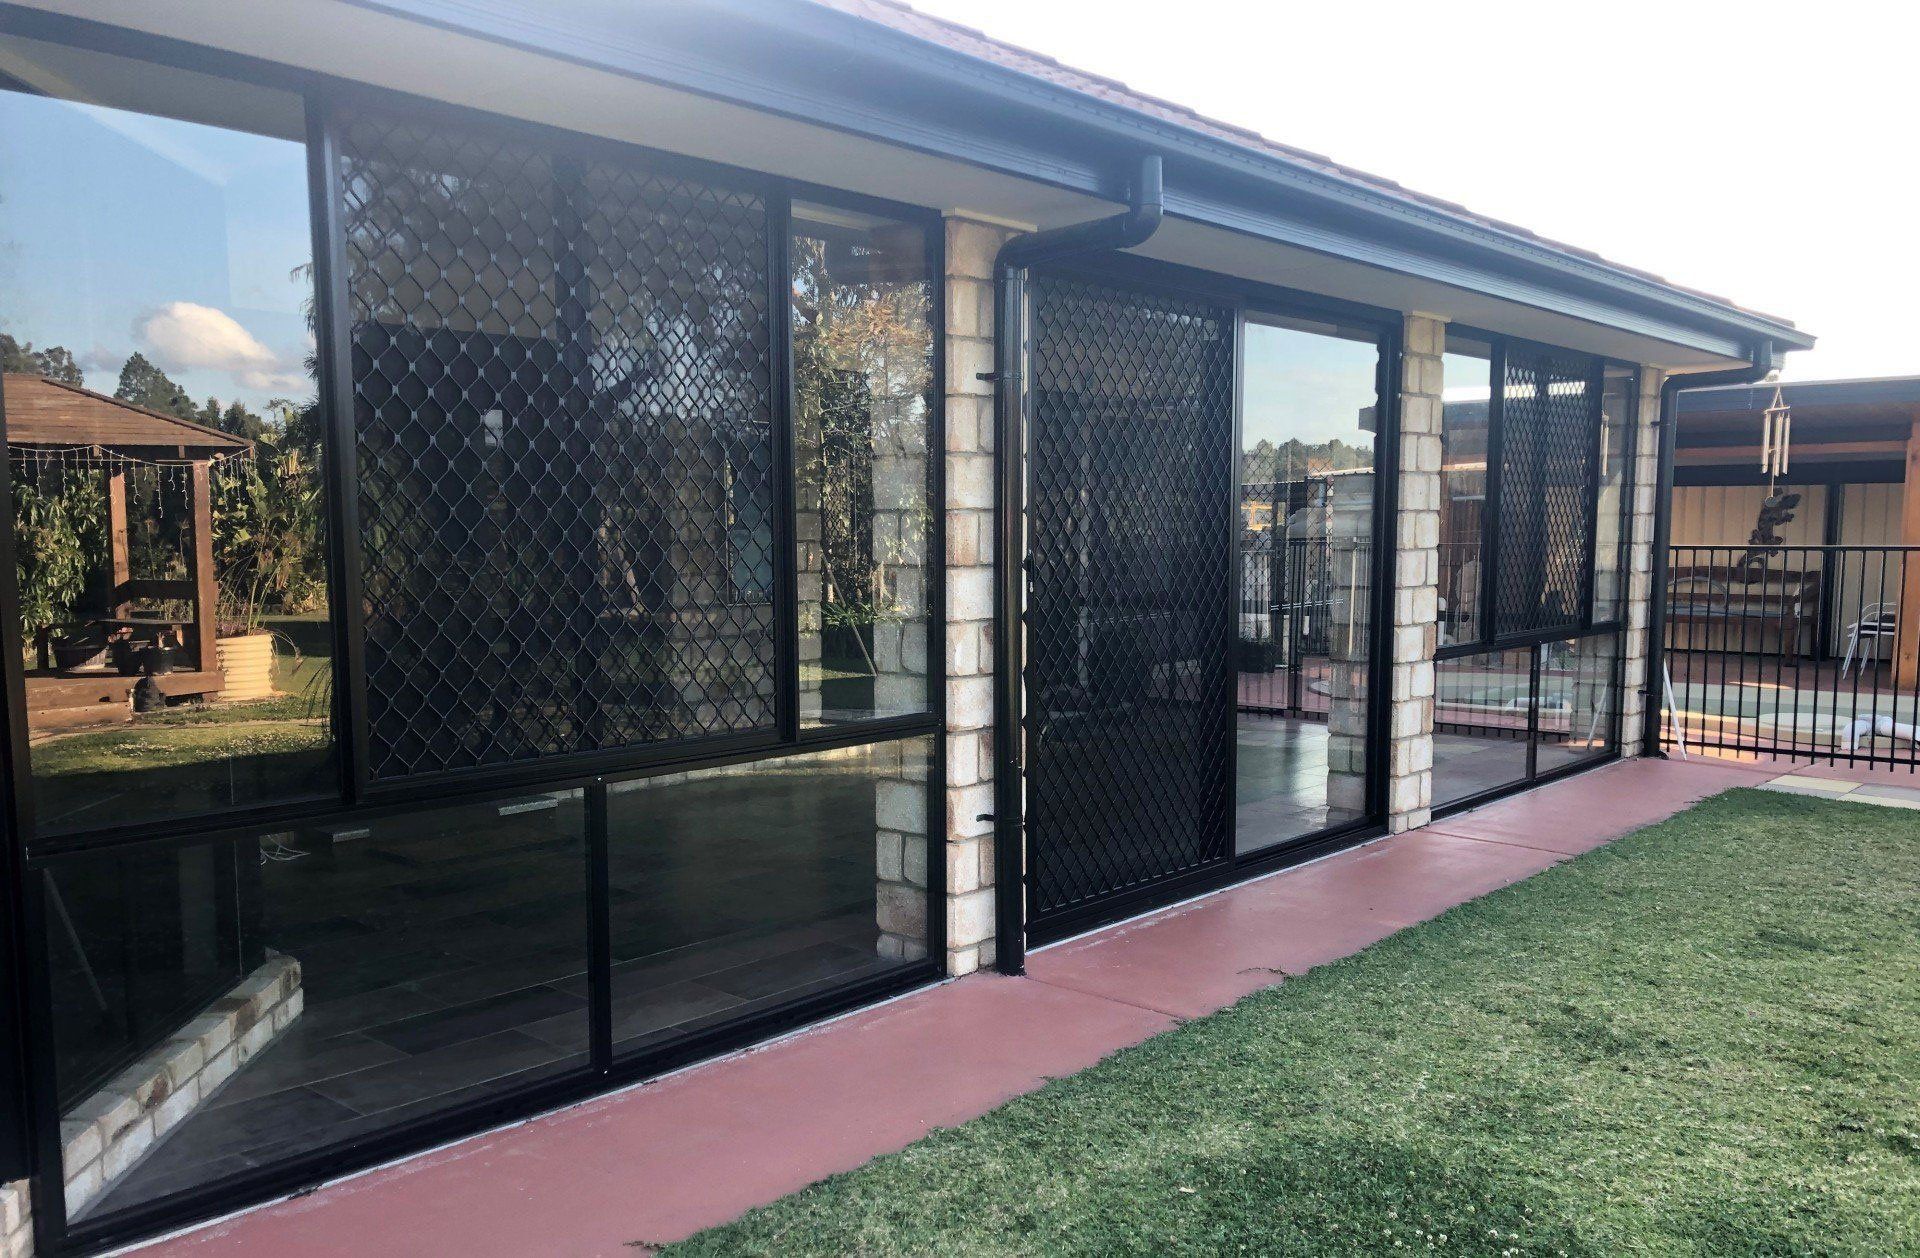 Elimbah Glass Patio Enclosure with diamond grille security screens on windows